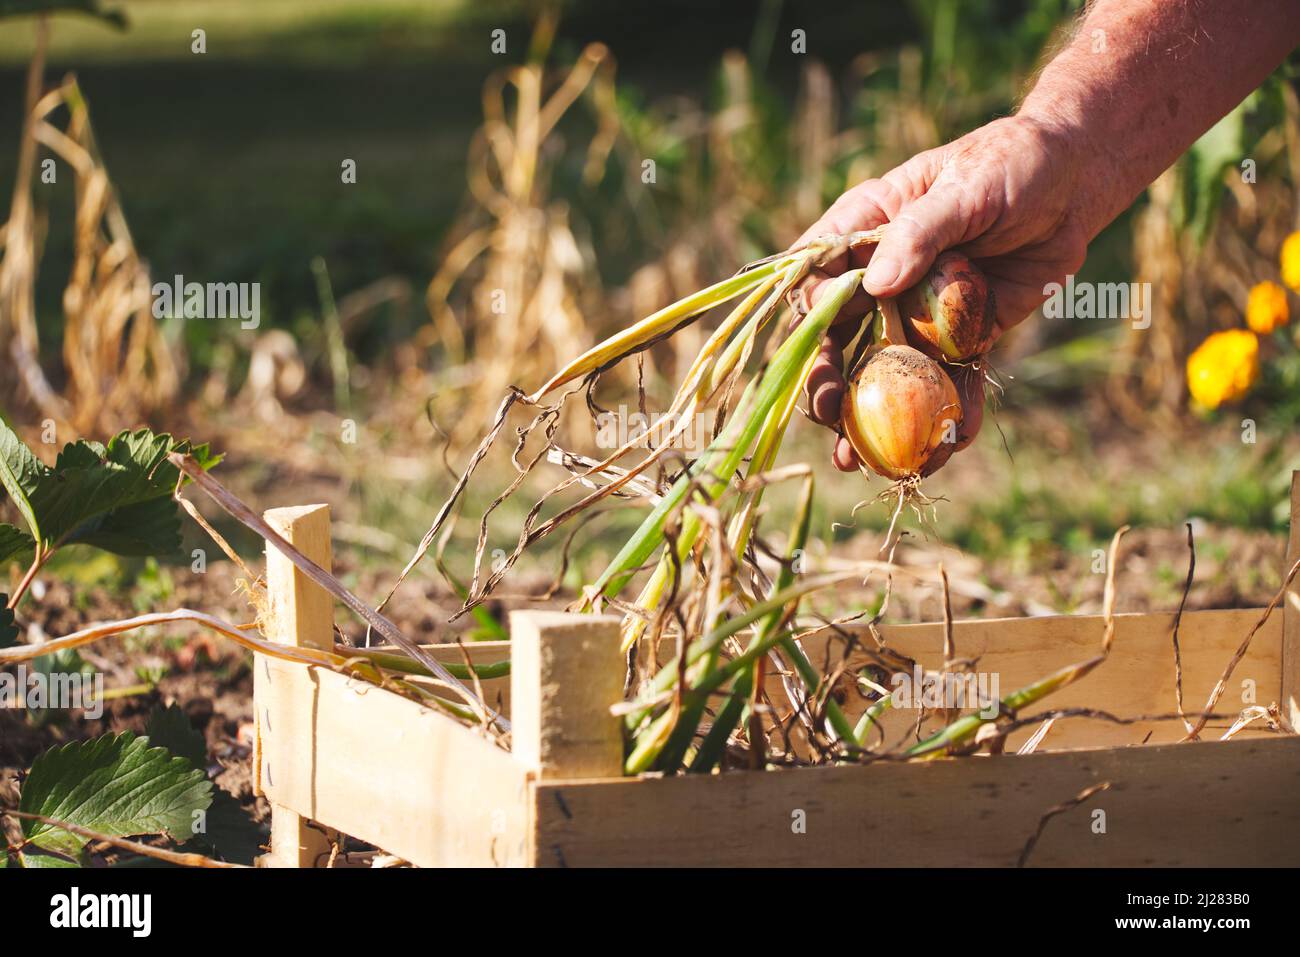 Senior farmer harvesting onions in organic garden. Old gardener holding harvested onion in his hands and putting them to wooden crate Stock Photo